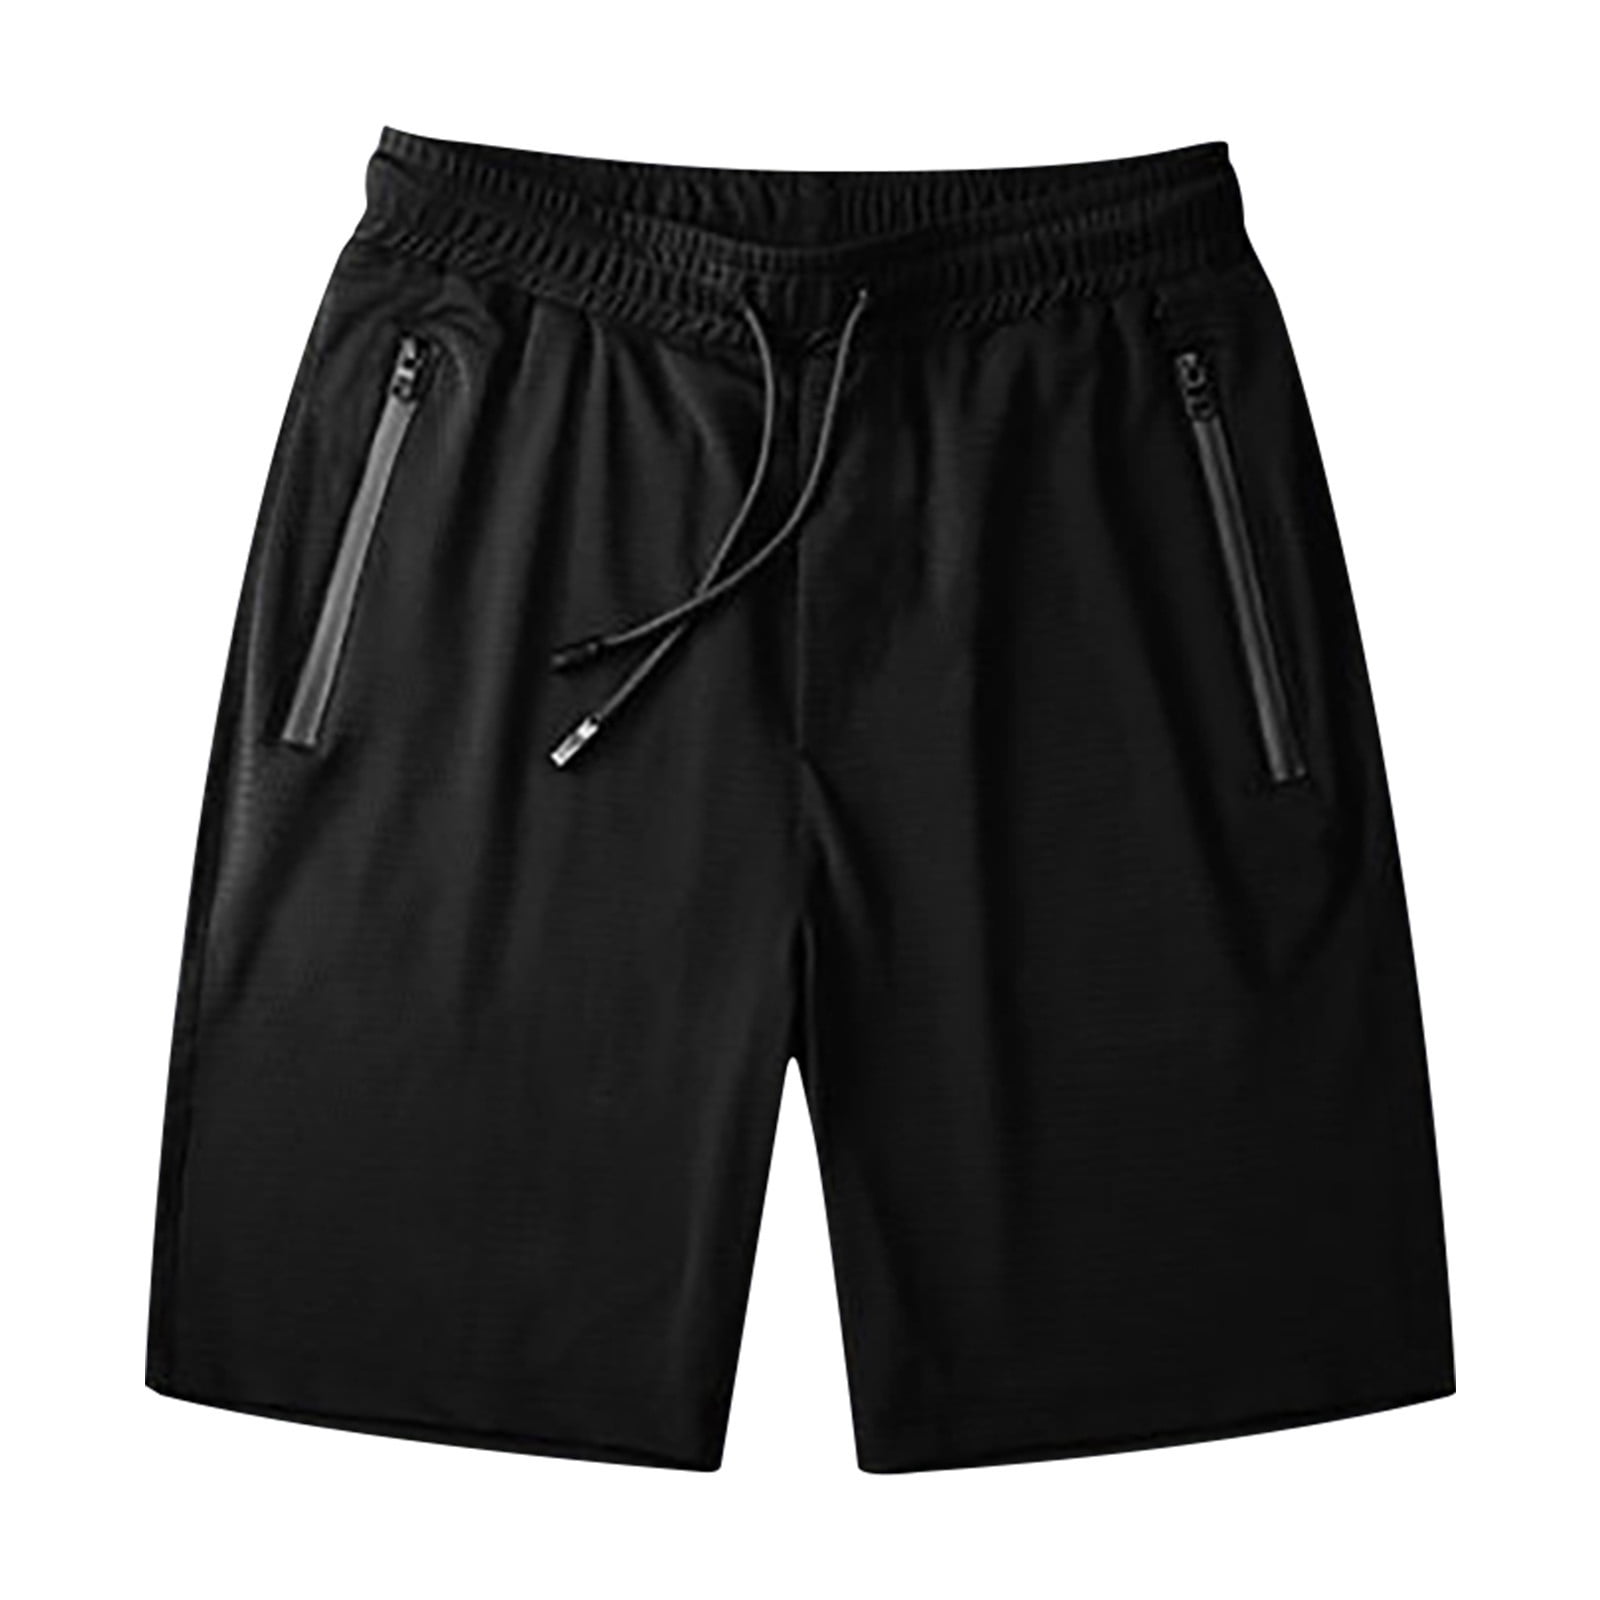 Umfun Men's Gym Shorts Sports Quick Dry Workout Running or Casual ...